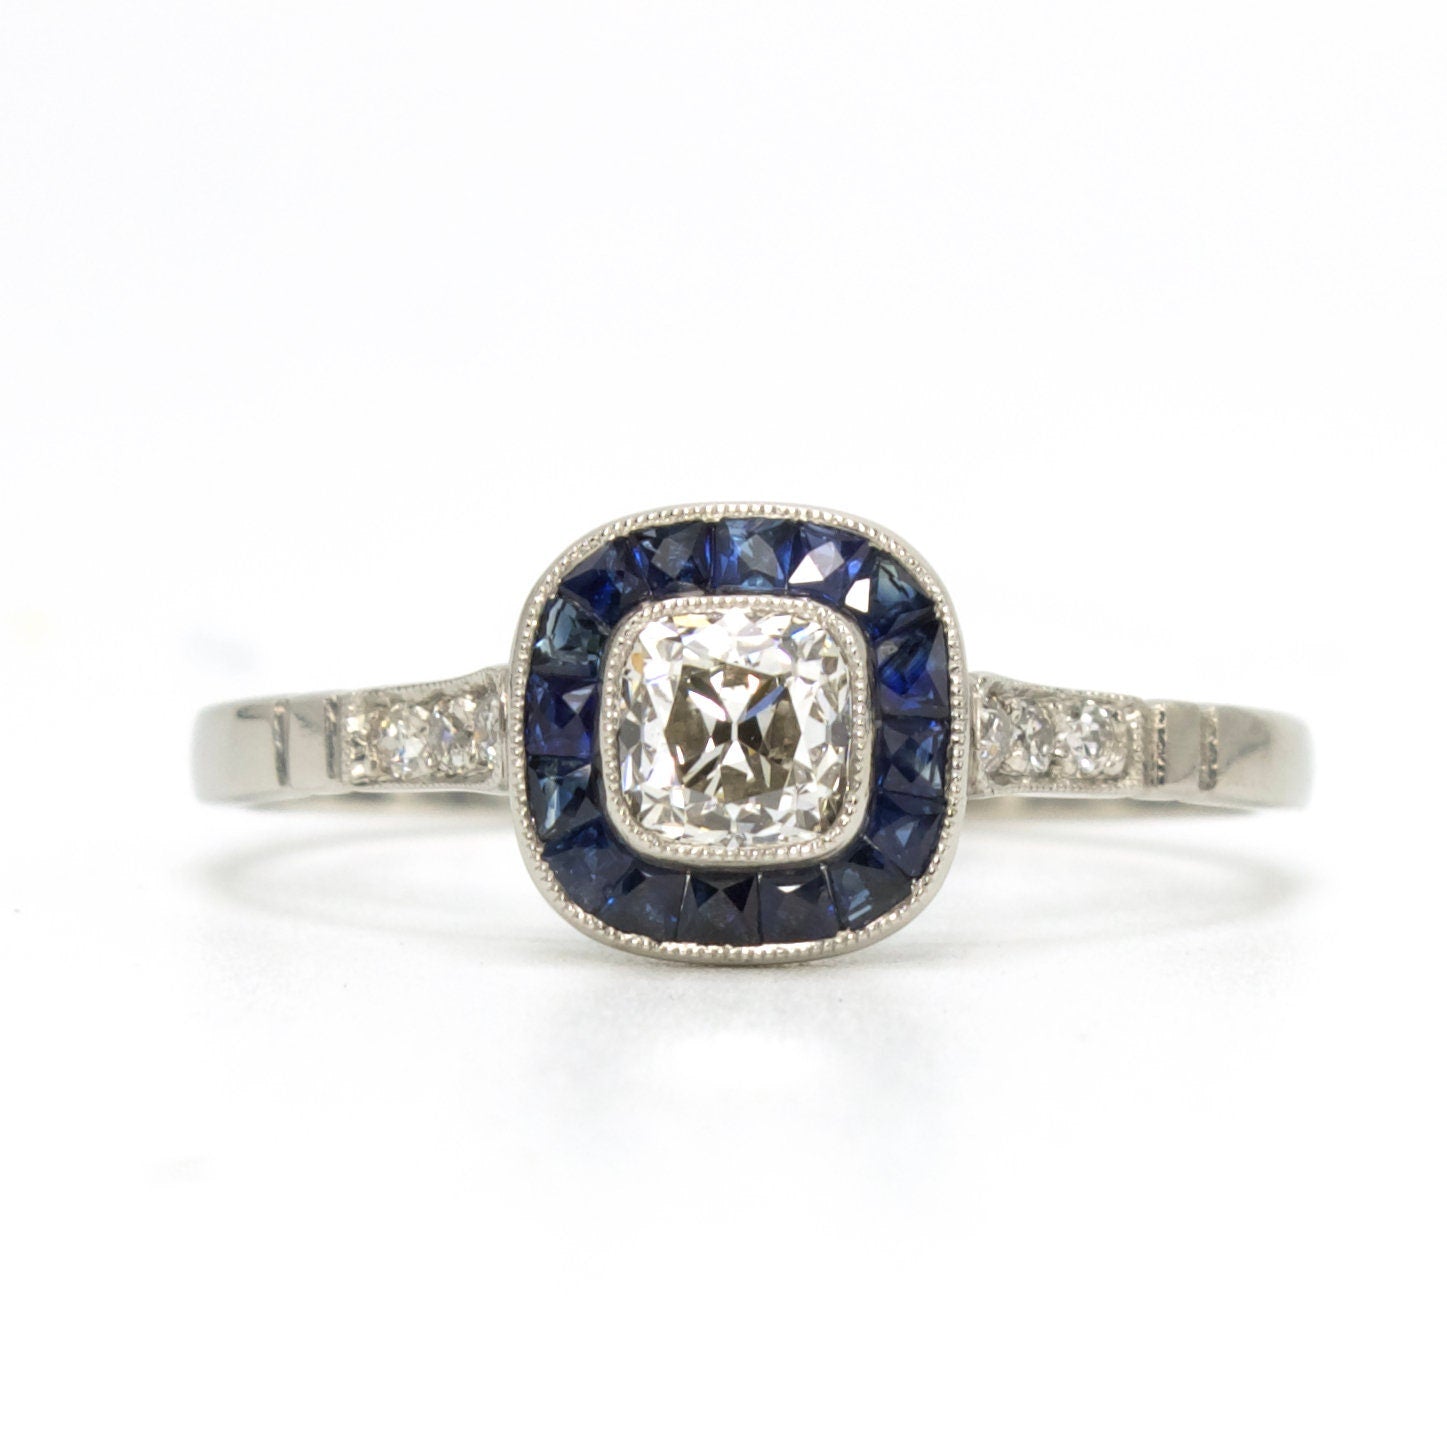 Antique Cushion Cut Diamond Target Ring with French Cut Sapphire Halo in Platinum